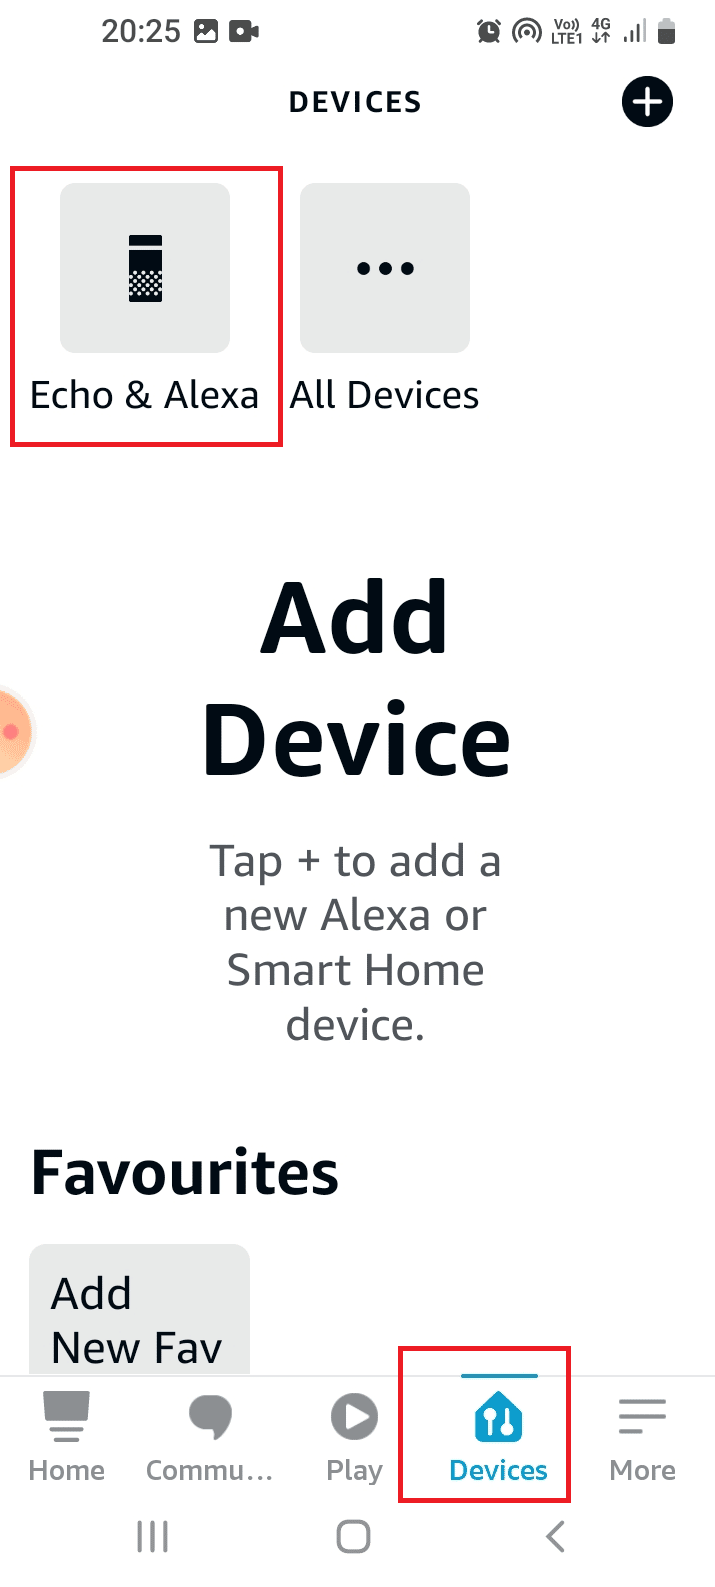 Move to the Devices tab and tap on the Echo and Alexa option. Troubleshooting Alexa Echo